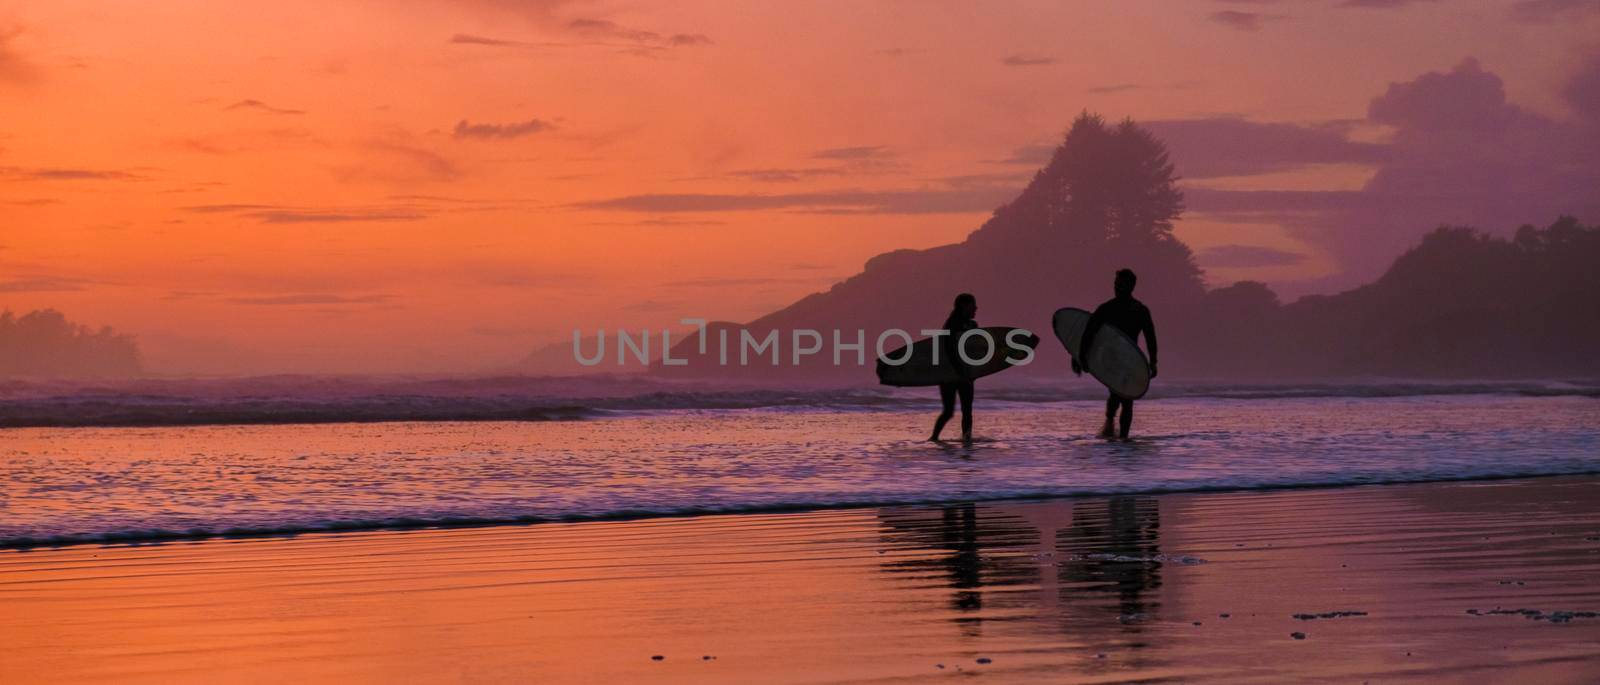 Tofino Vancouver Island Pacific rim coast, surfers with board during sunset at the beach by fokkebok